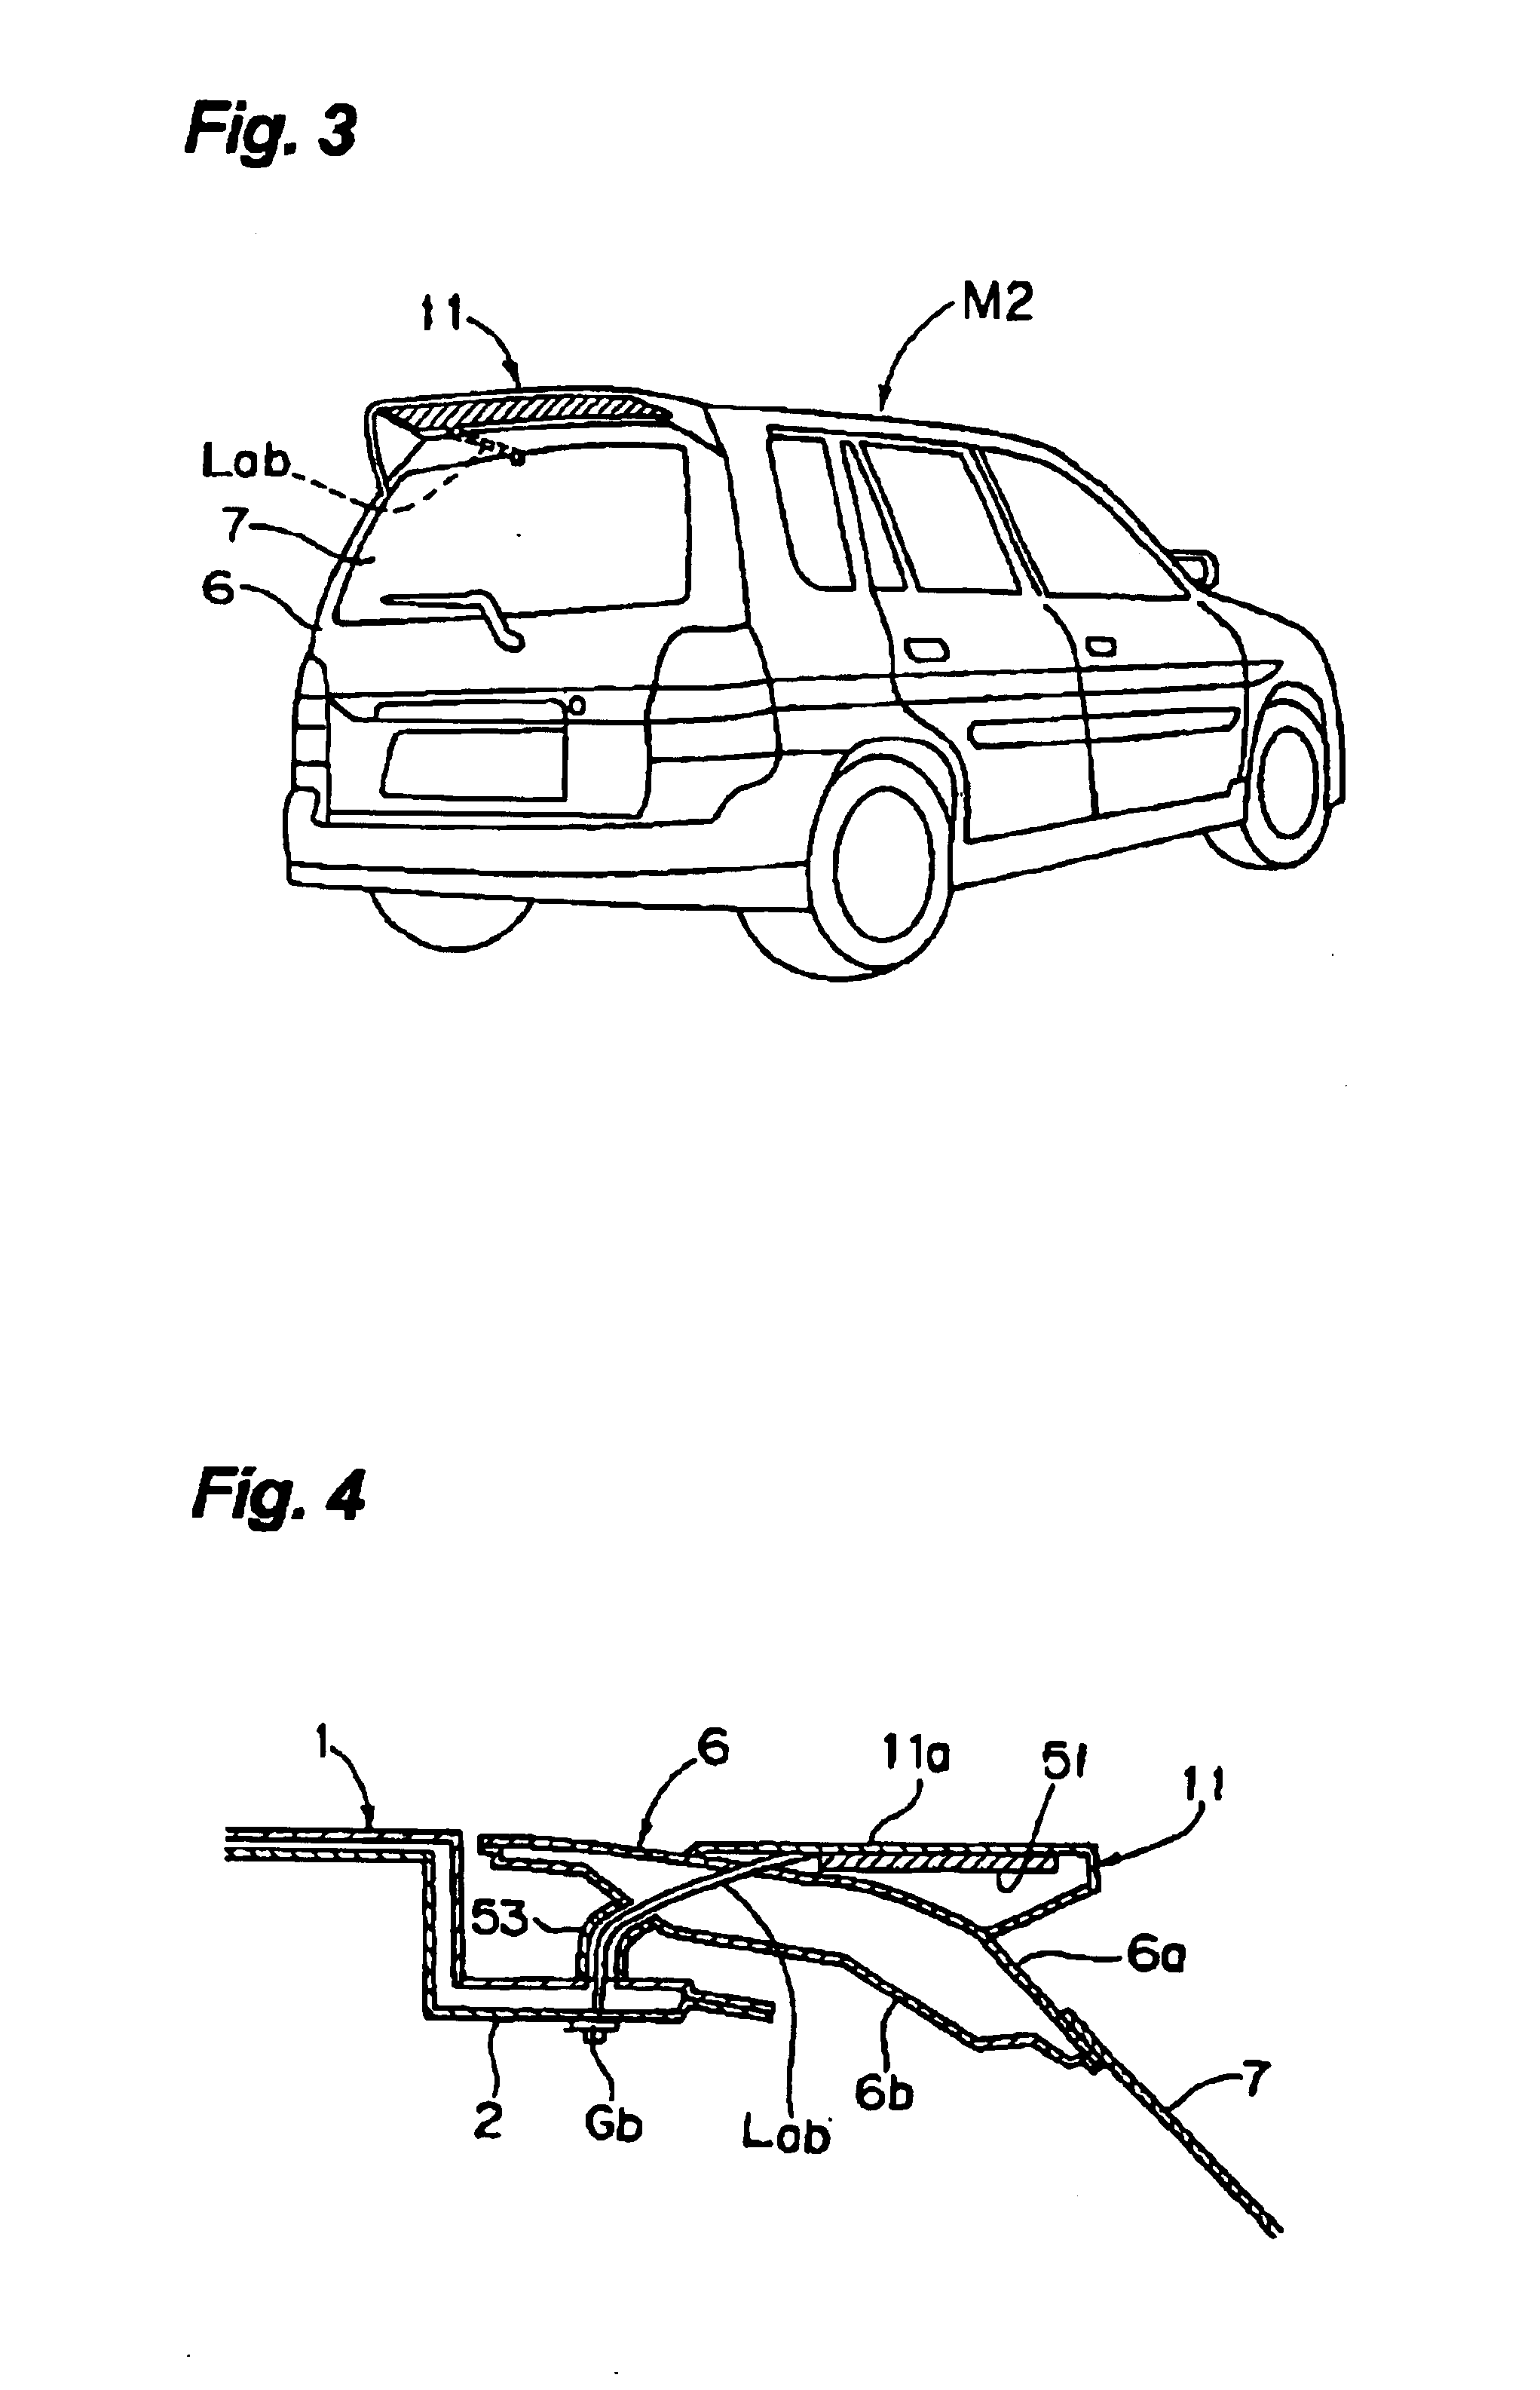 Antenna apparatus for vehicle